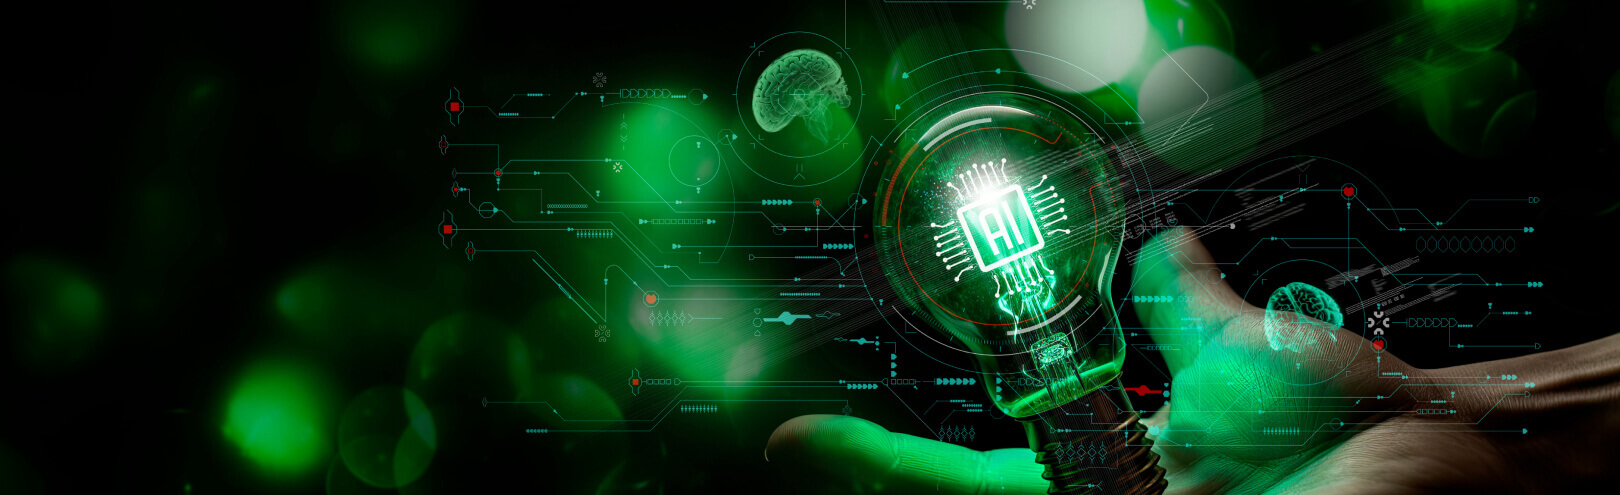 Artificial intelligence of futuristic Innovative technology concept. Businessman hand holding light bulbs thinking ideas with AI brain genius analysis business in green light black background.